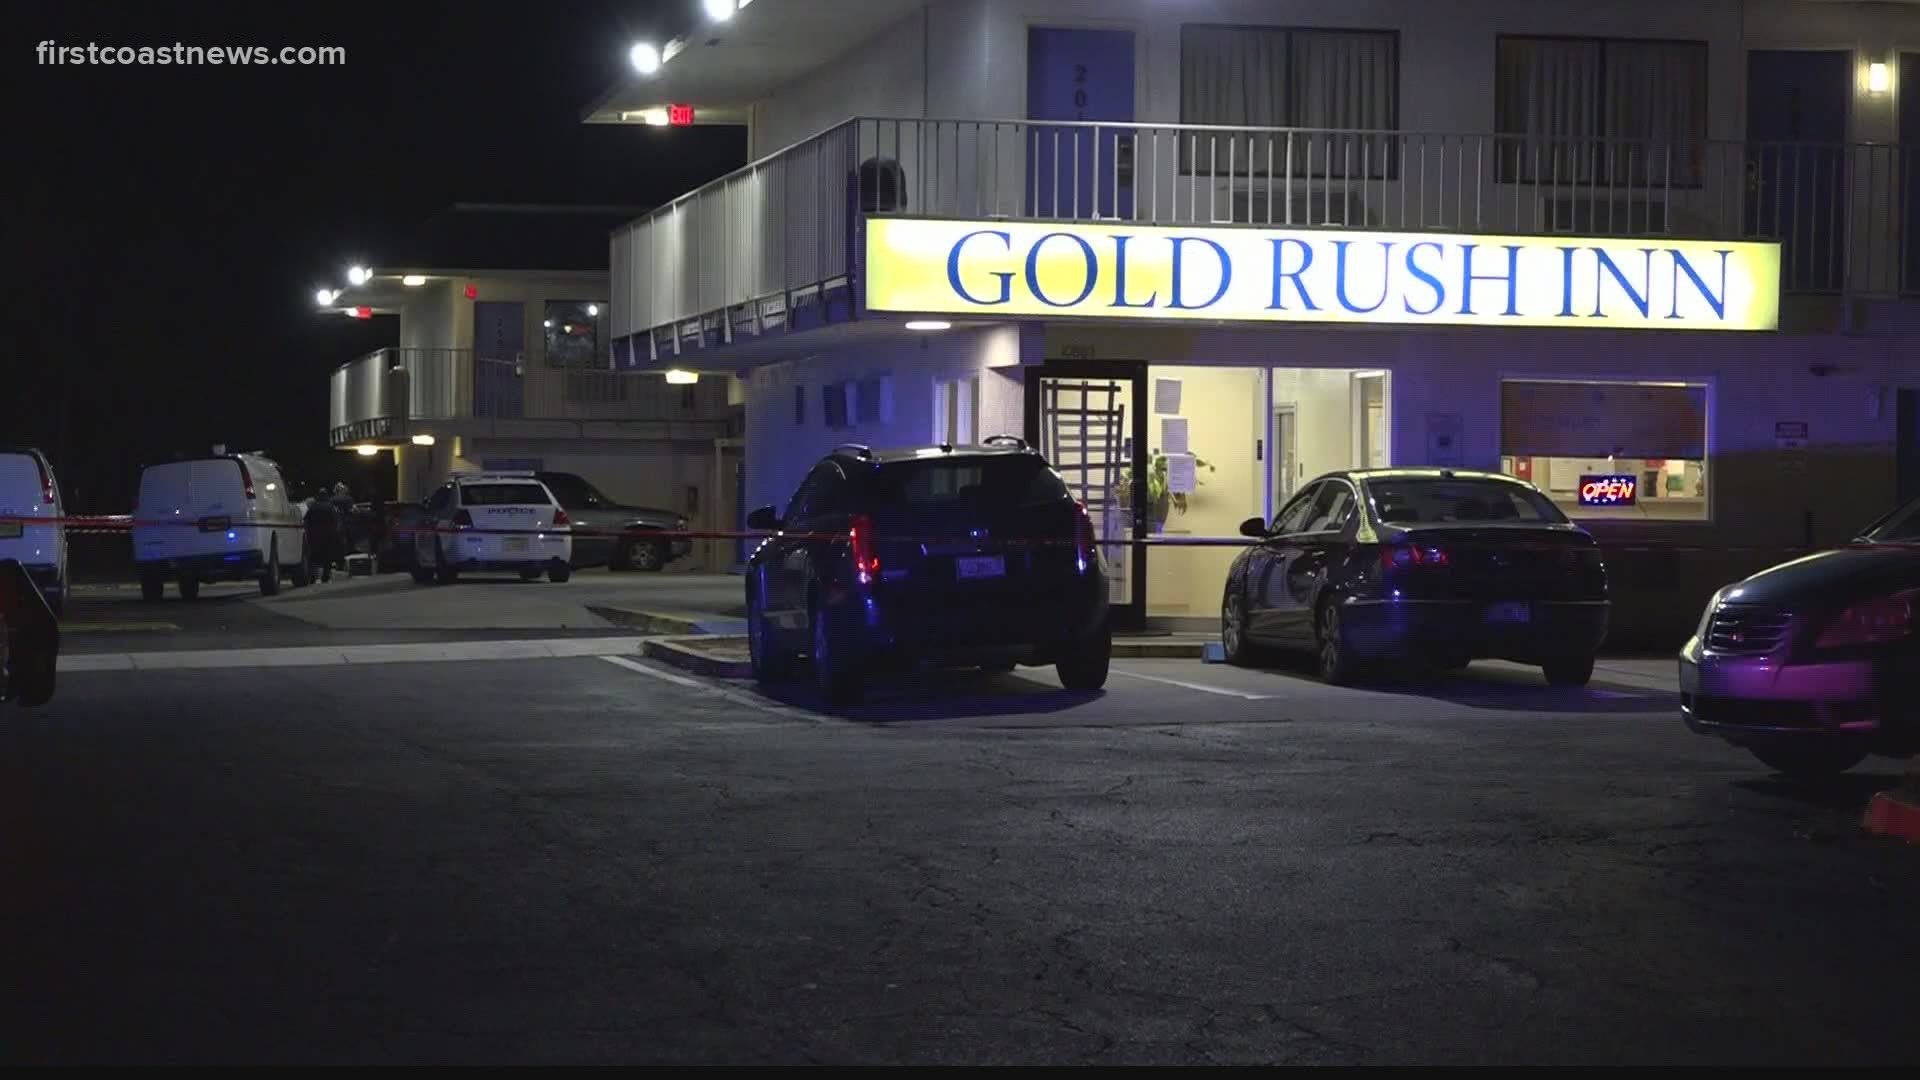 The shooting happened at the Gold Rush Inn on the city's Northside.